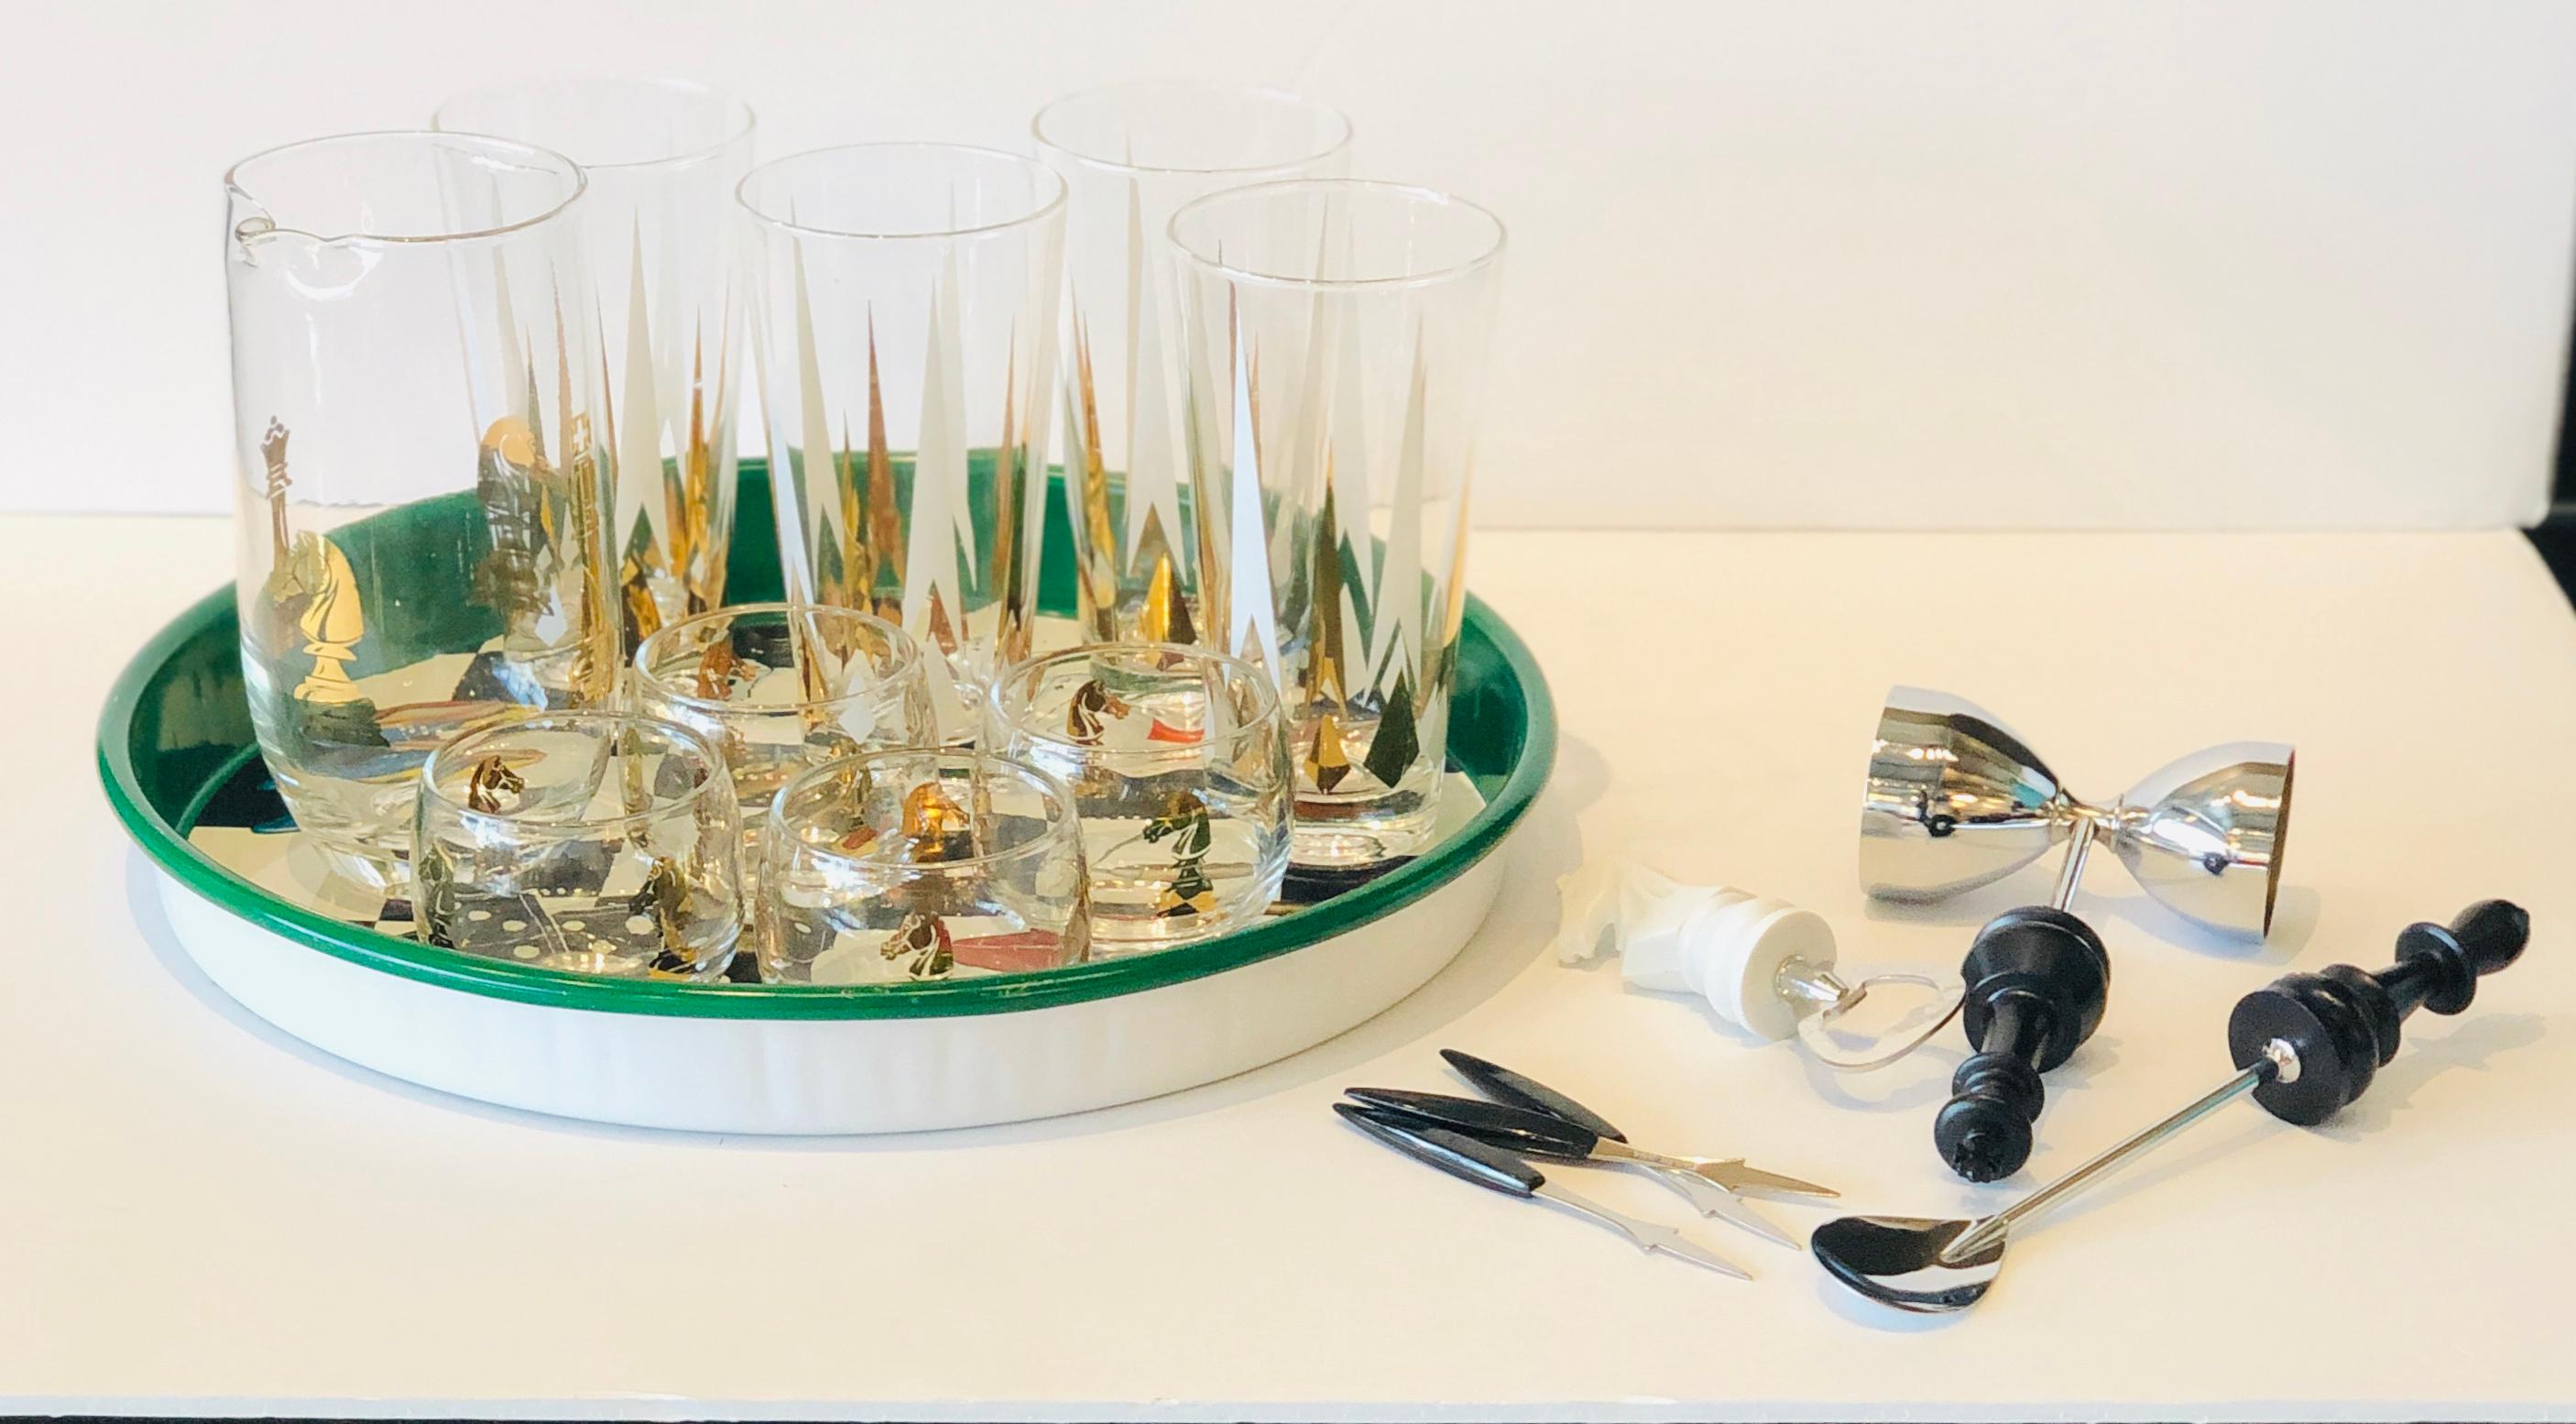 Offered is a Mid-Century Modern assembled chess themed barware set in green, black, red, white and gold comprising of:
A complete six-piece Hickok 